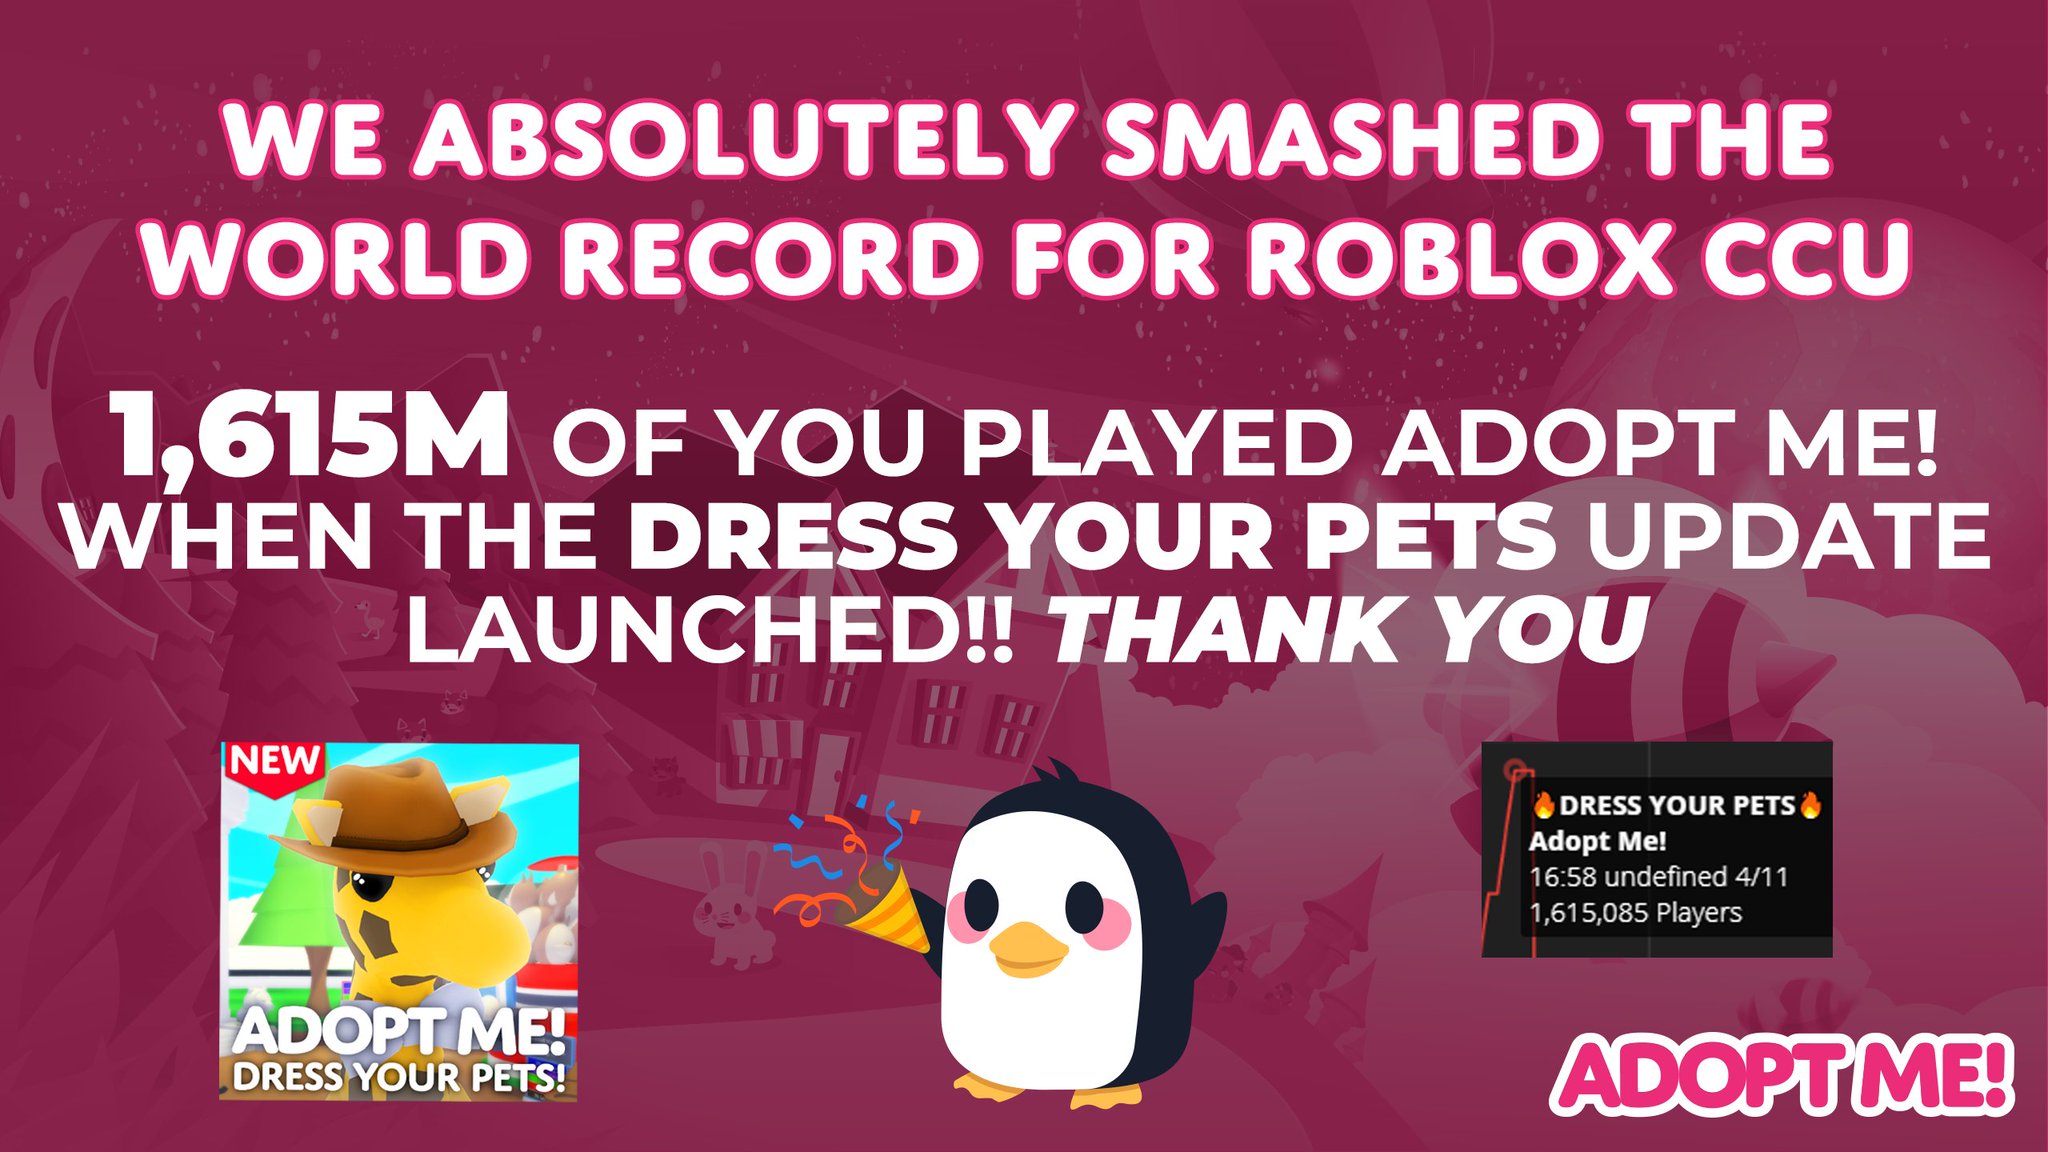 Adopt Me On Twitter The New World Record For Roblox Ccu Players Active Is 1 615 Million Players Thank You So Much For Tuning In To See The Live Event And Apologies - roblox record location